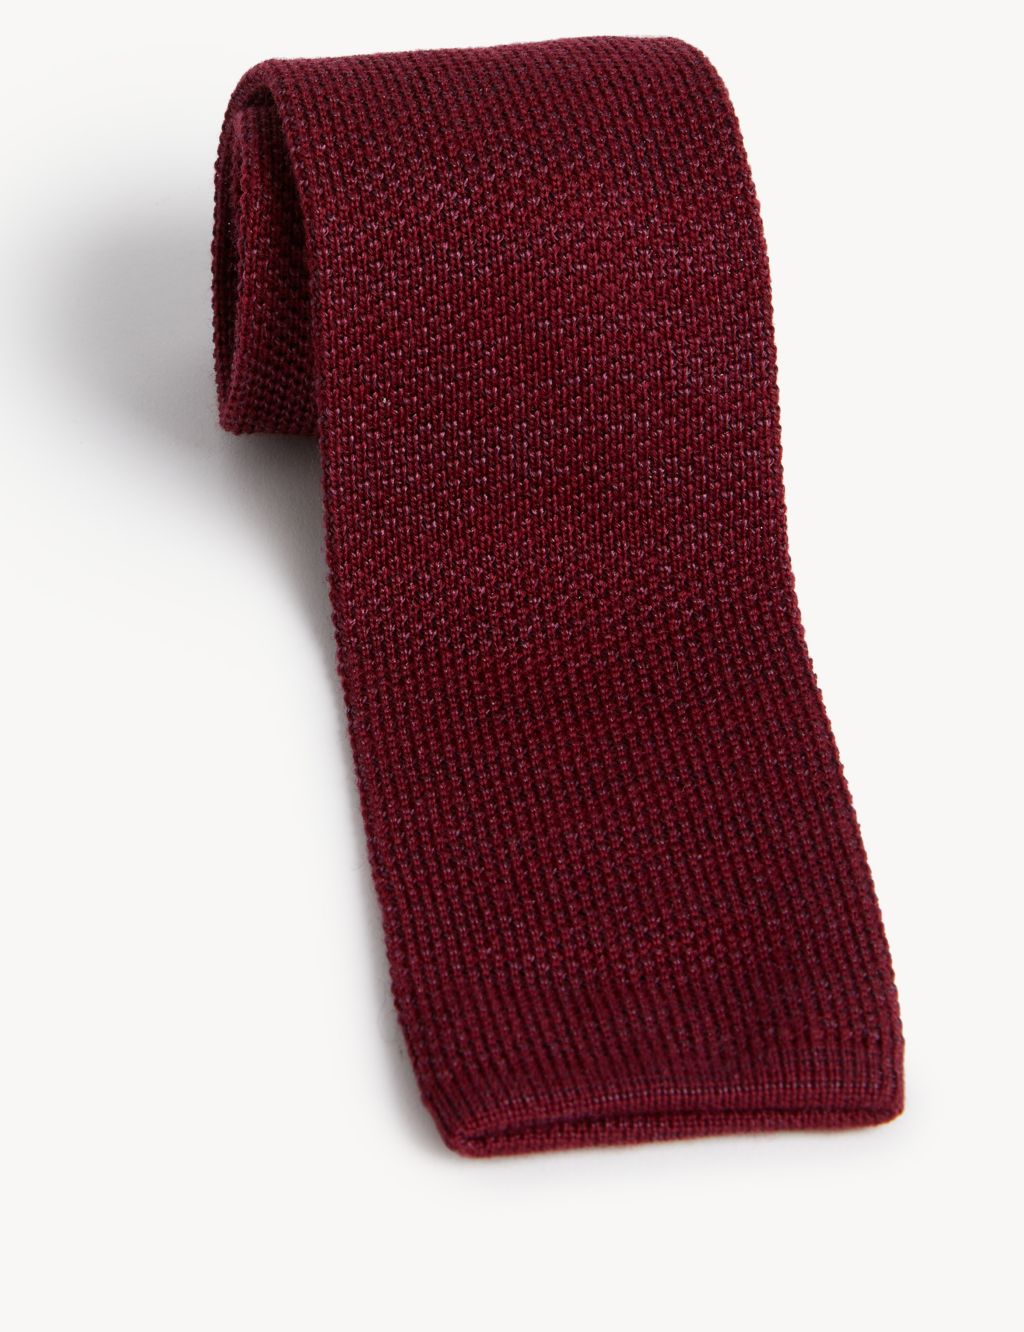 Italian Silk and Wool Knitted Tie image 1